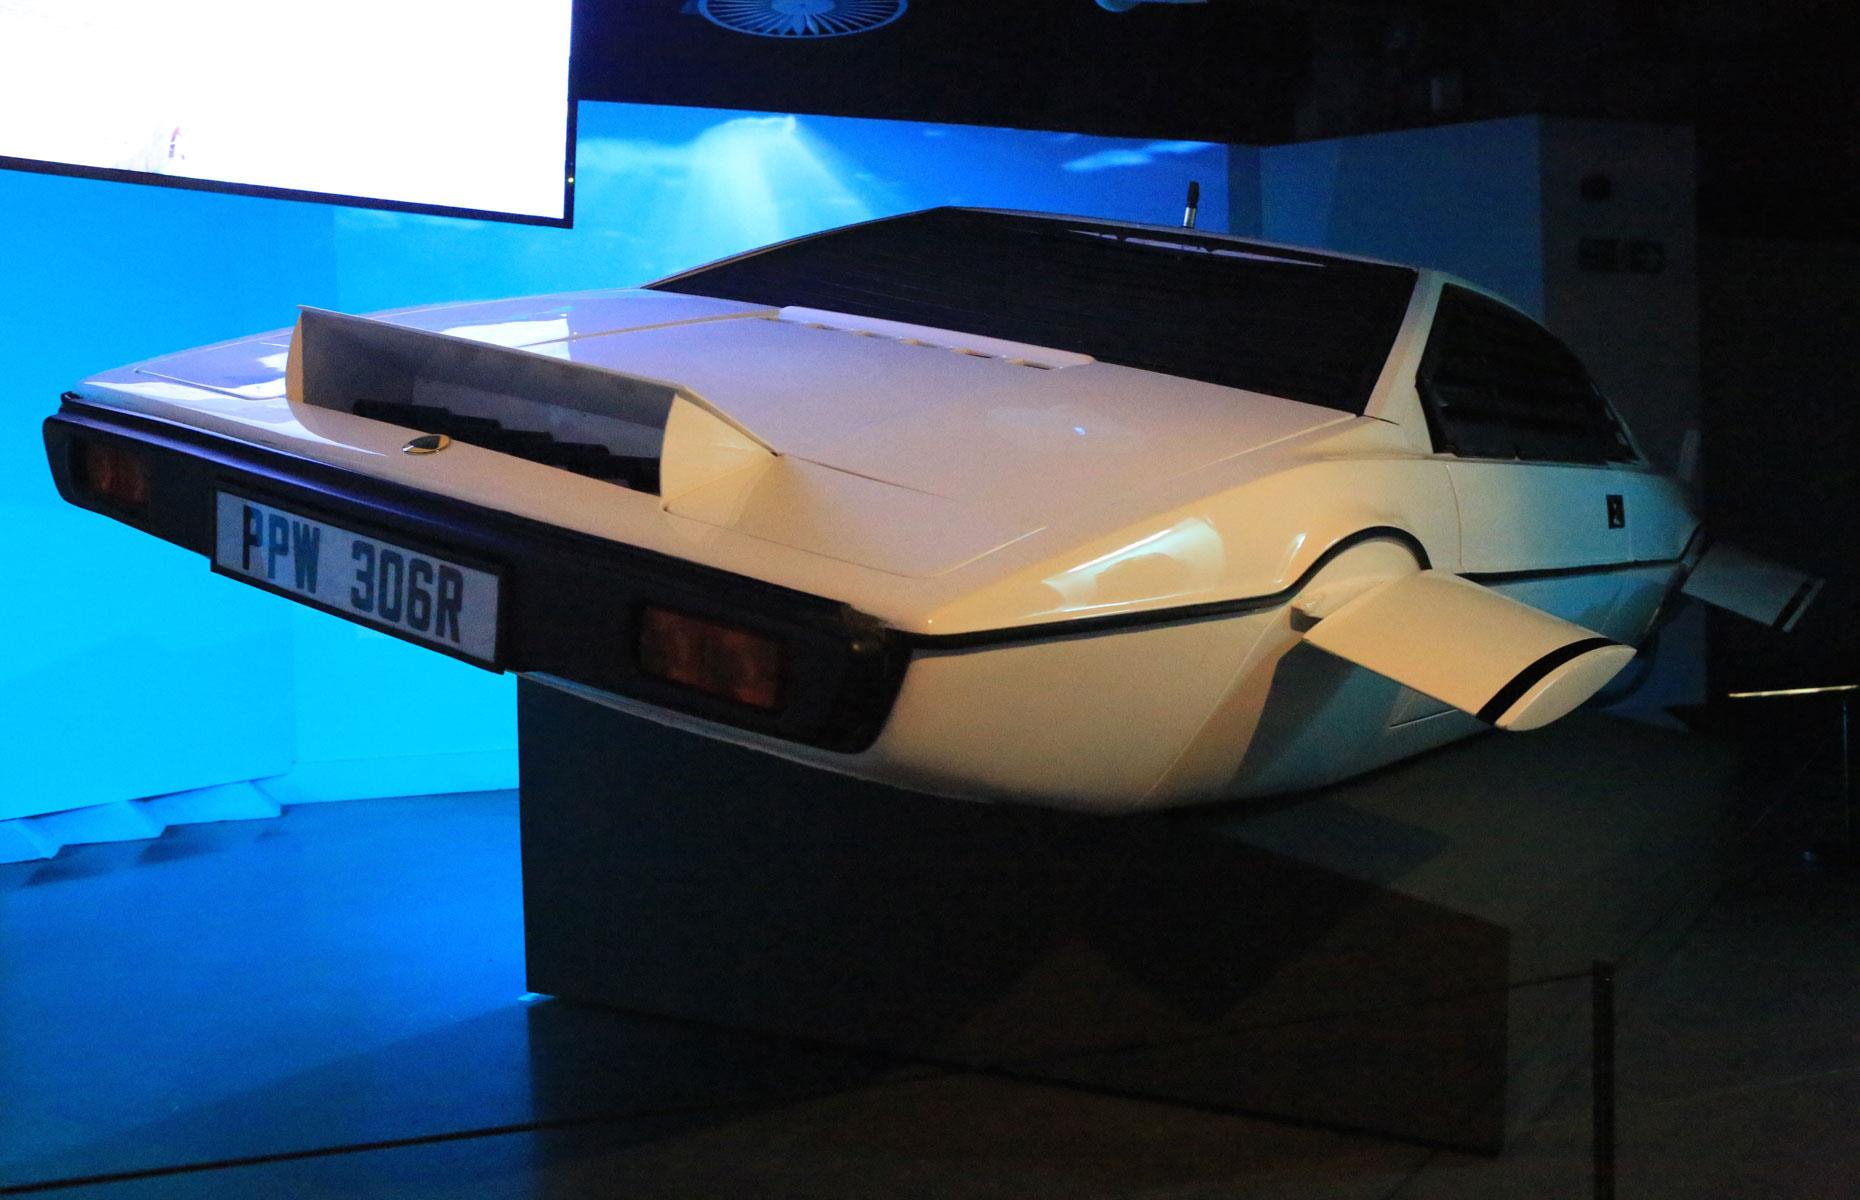 <p>Elon Musk just couldn't resist splurging more than £616,000 ($926k) in 2013 on James Bond's 1976 Lotus Esprit S1 Submarine car that featured in <em>The Spy Who Loved Me</em>. Nicknamed 'Wet Nellie', the submersible was built specially for the 007 movie at a cost of around $100,000 (£49.3k) and clad in a Lotus Esprit S1 bodyshell.</p>